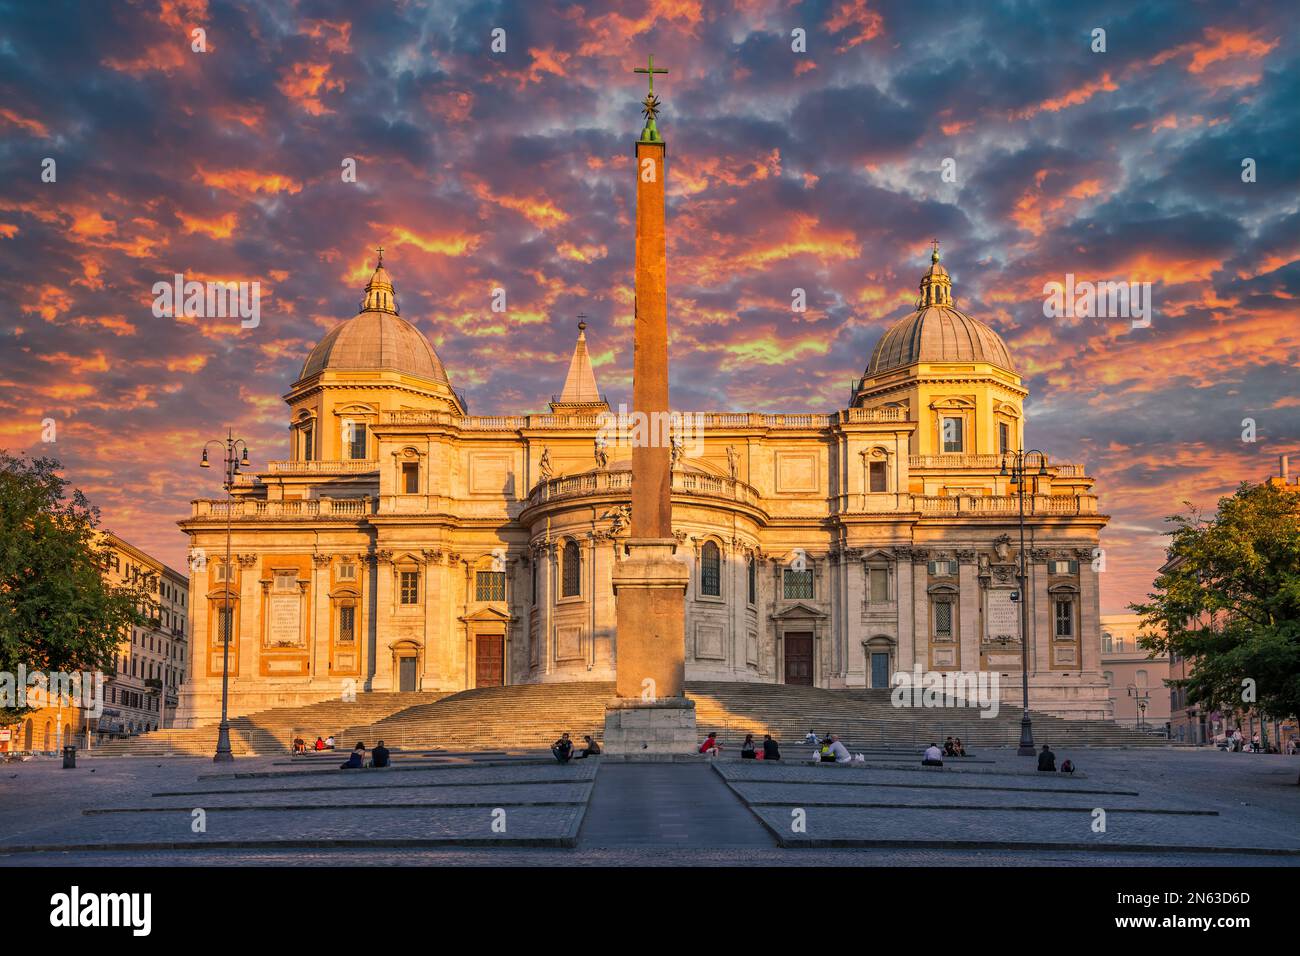 Basilica Papale di Santa Maria Maggiore, one of the four papal basilicas and Piazza dell Esquilino in Rome, Italy Stock Photo